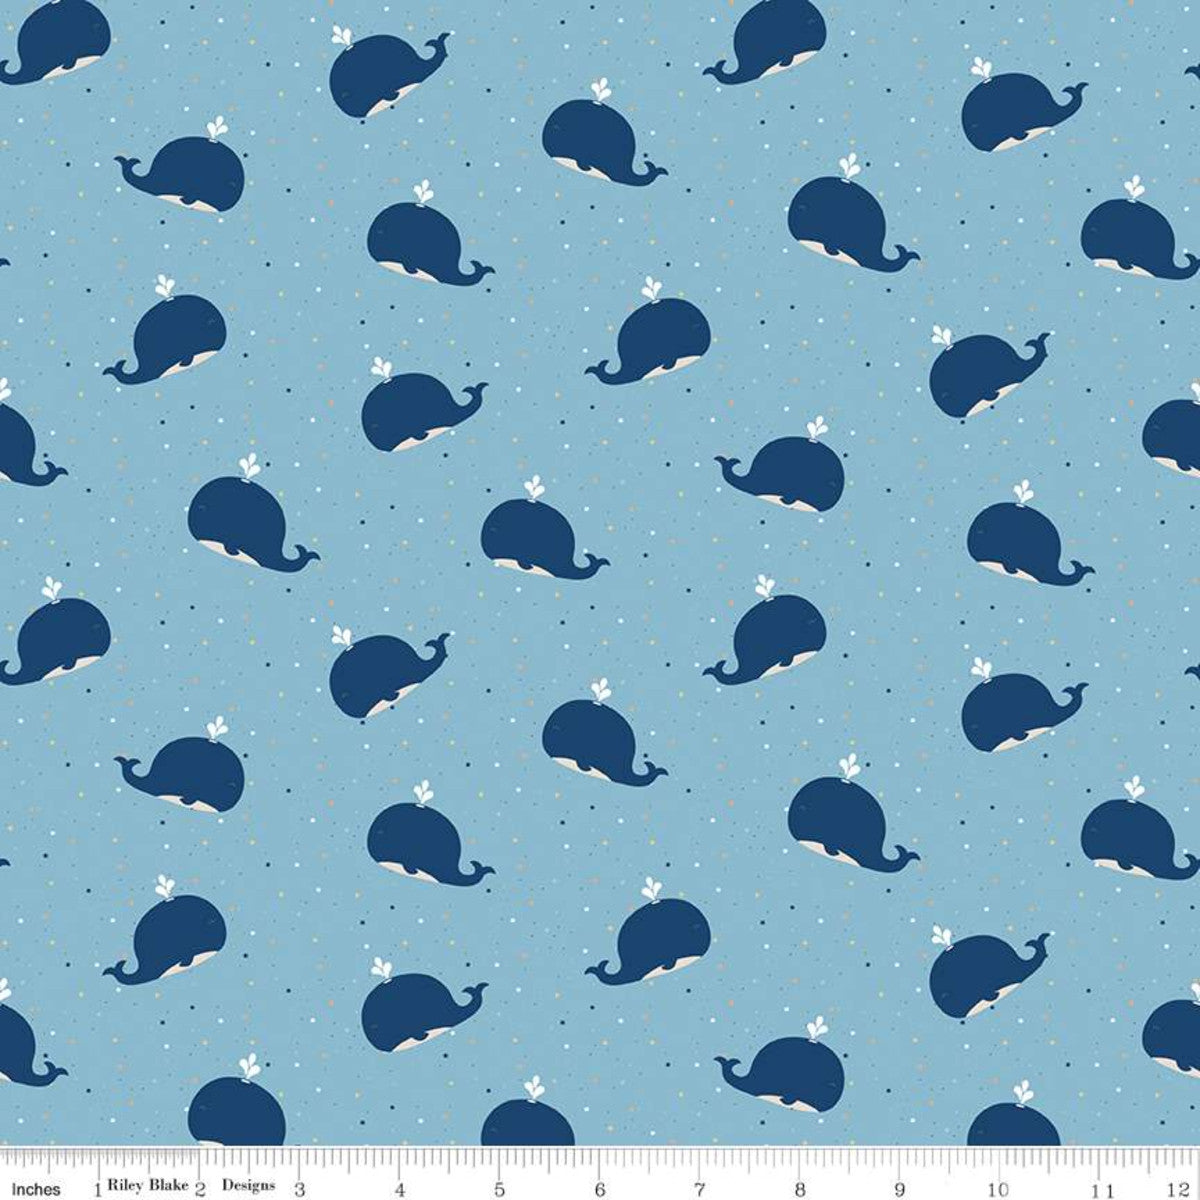 Juvenile Flannel : Whales in Blue : Riley Blake : Flannel